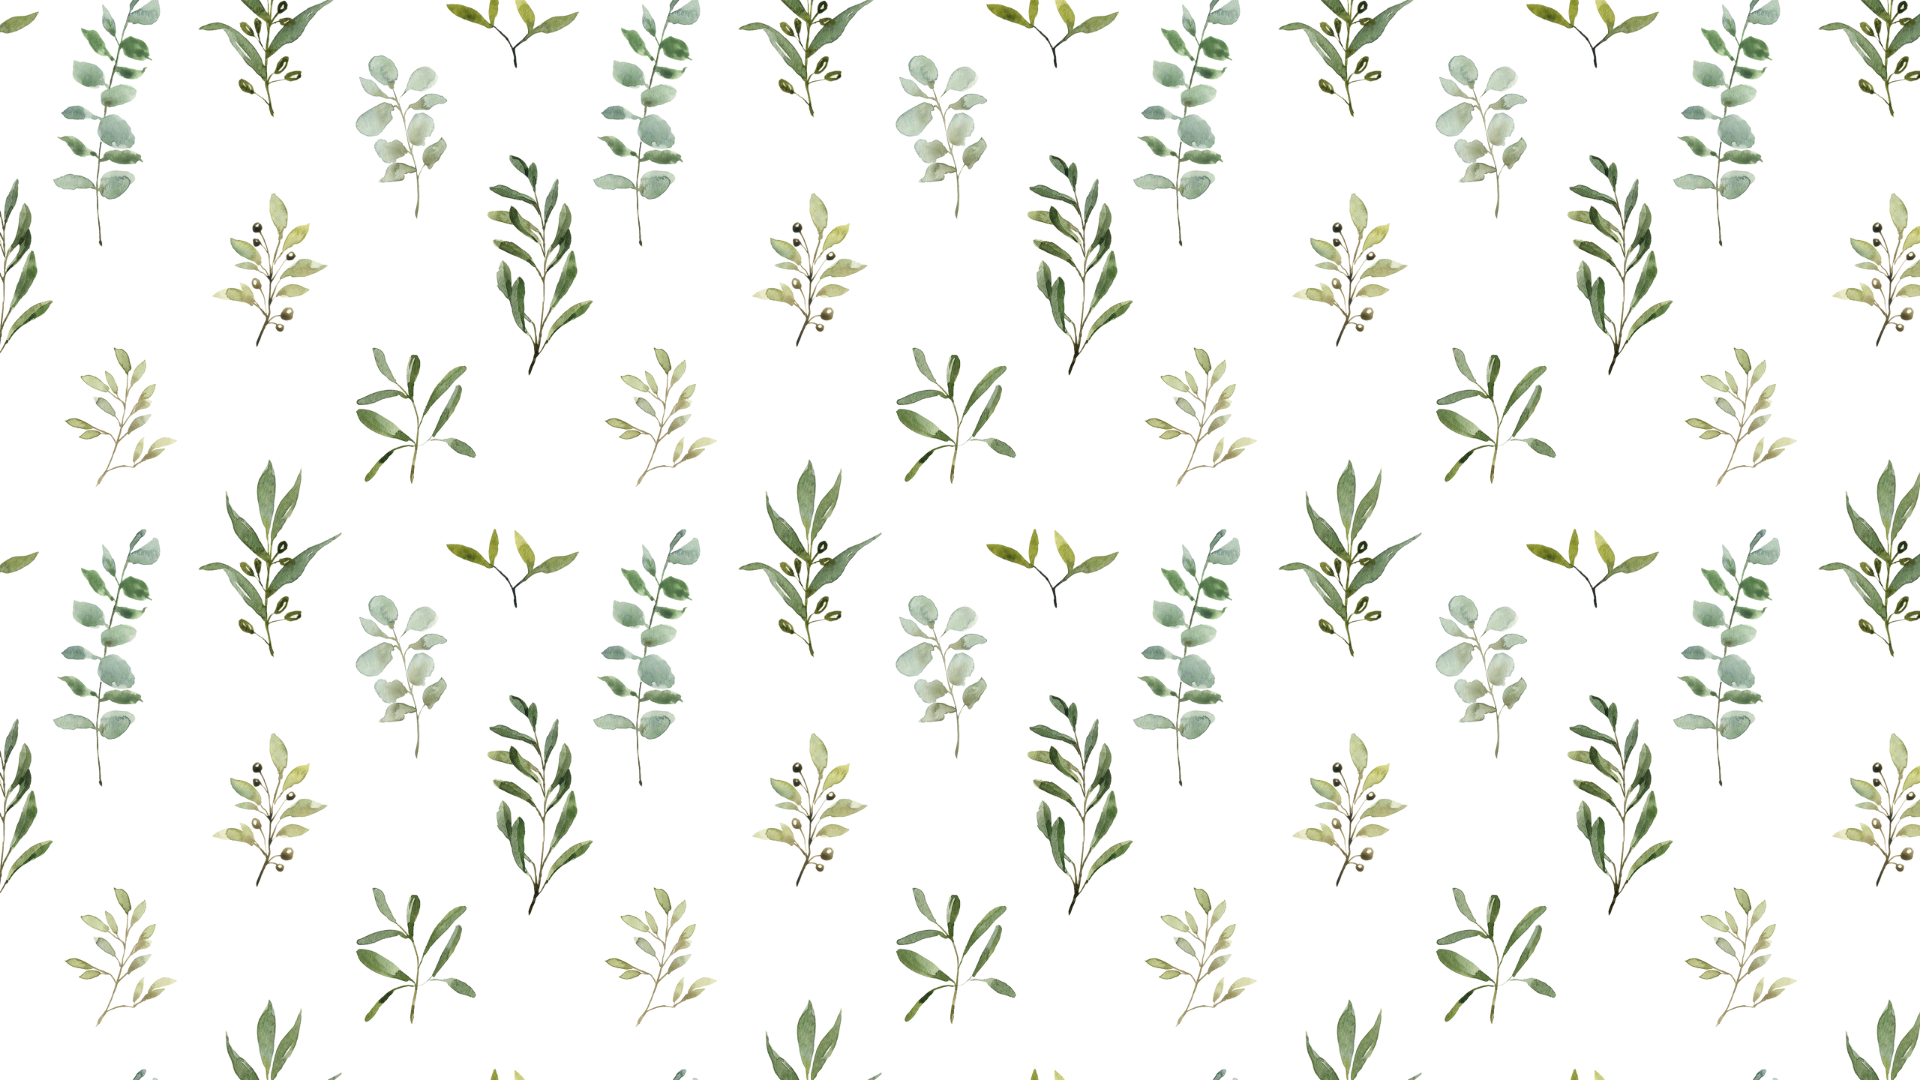 Sage Green Aesthetic Wallpaper Background (FREE)